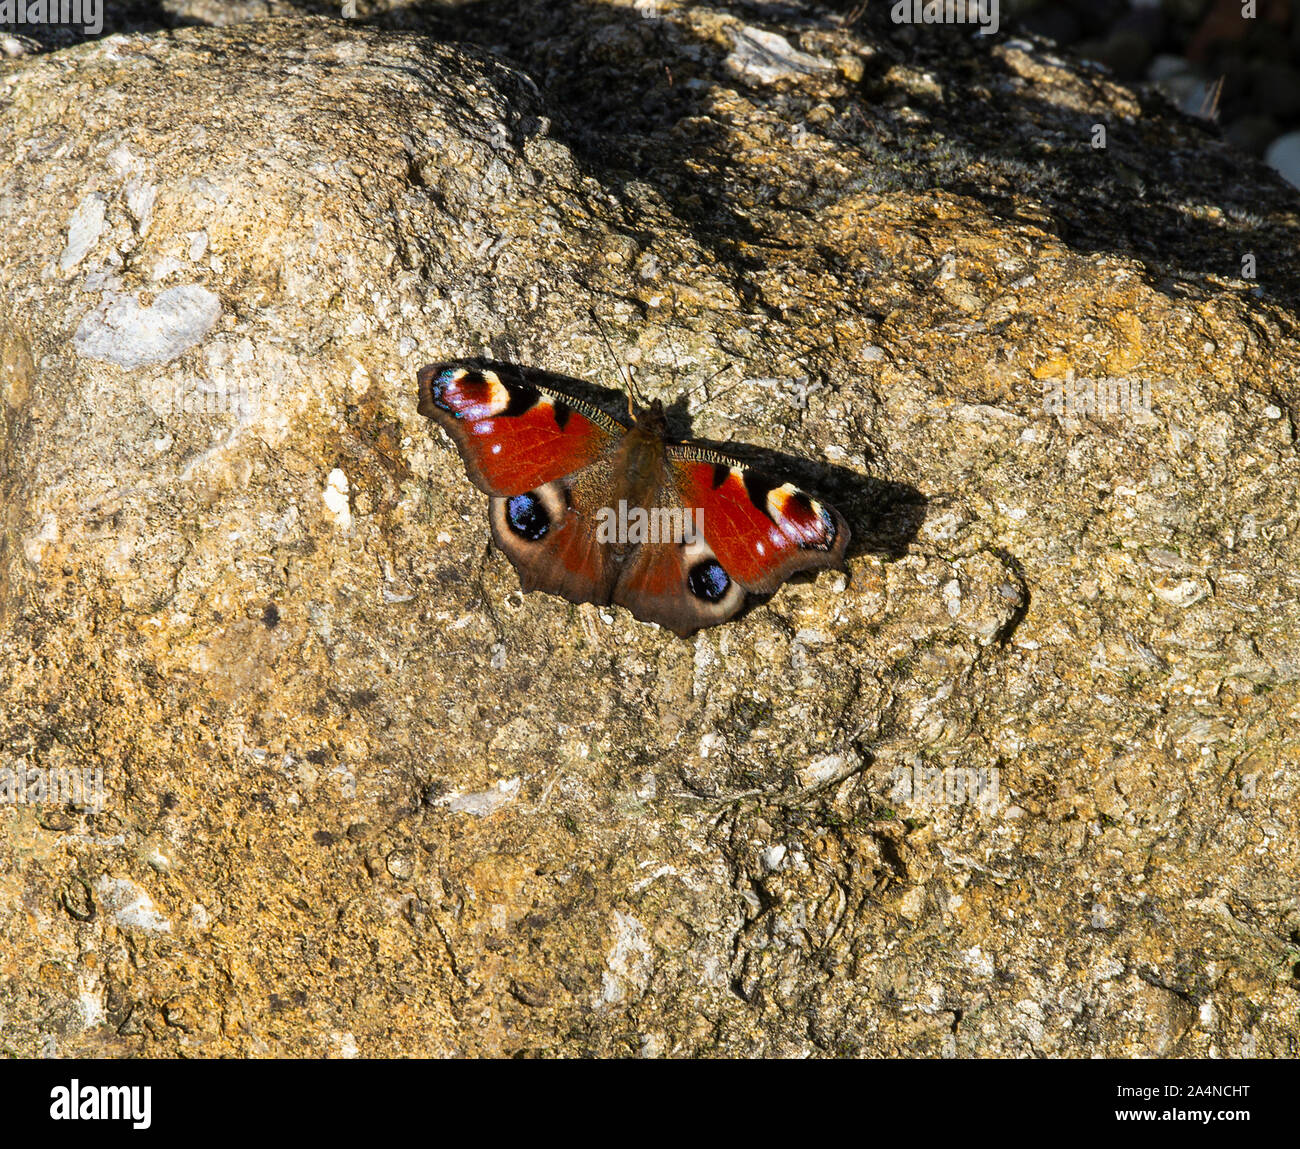 A Beautiful Peacock Butterfly Sunbathing on a Granite Rock in a Garden at Sawdon North Yorkshire England United Kingdom UK Stock Photo